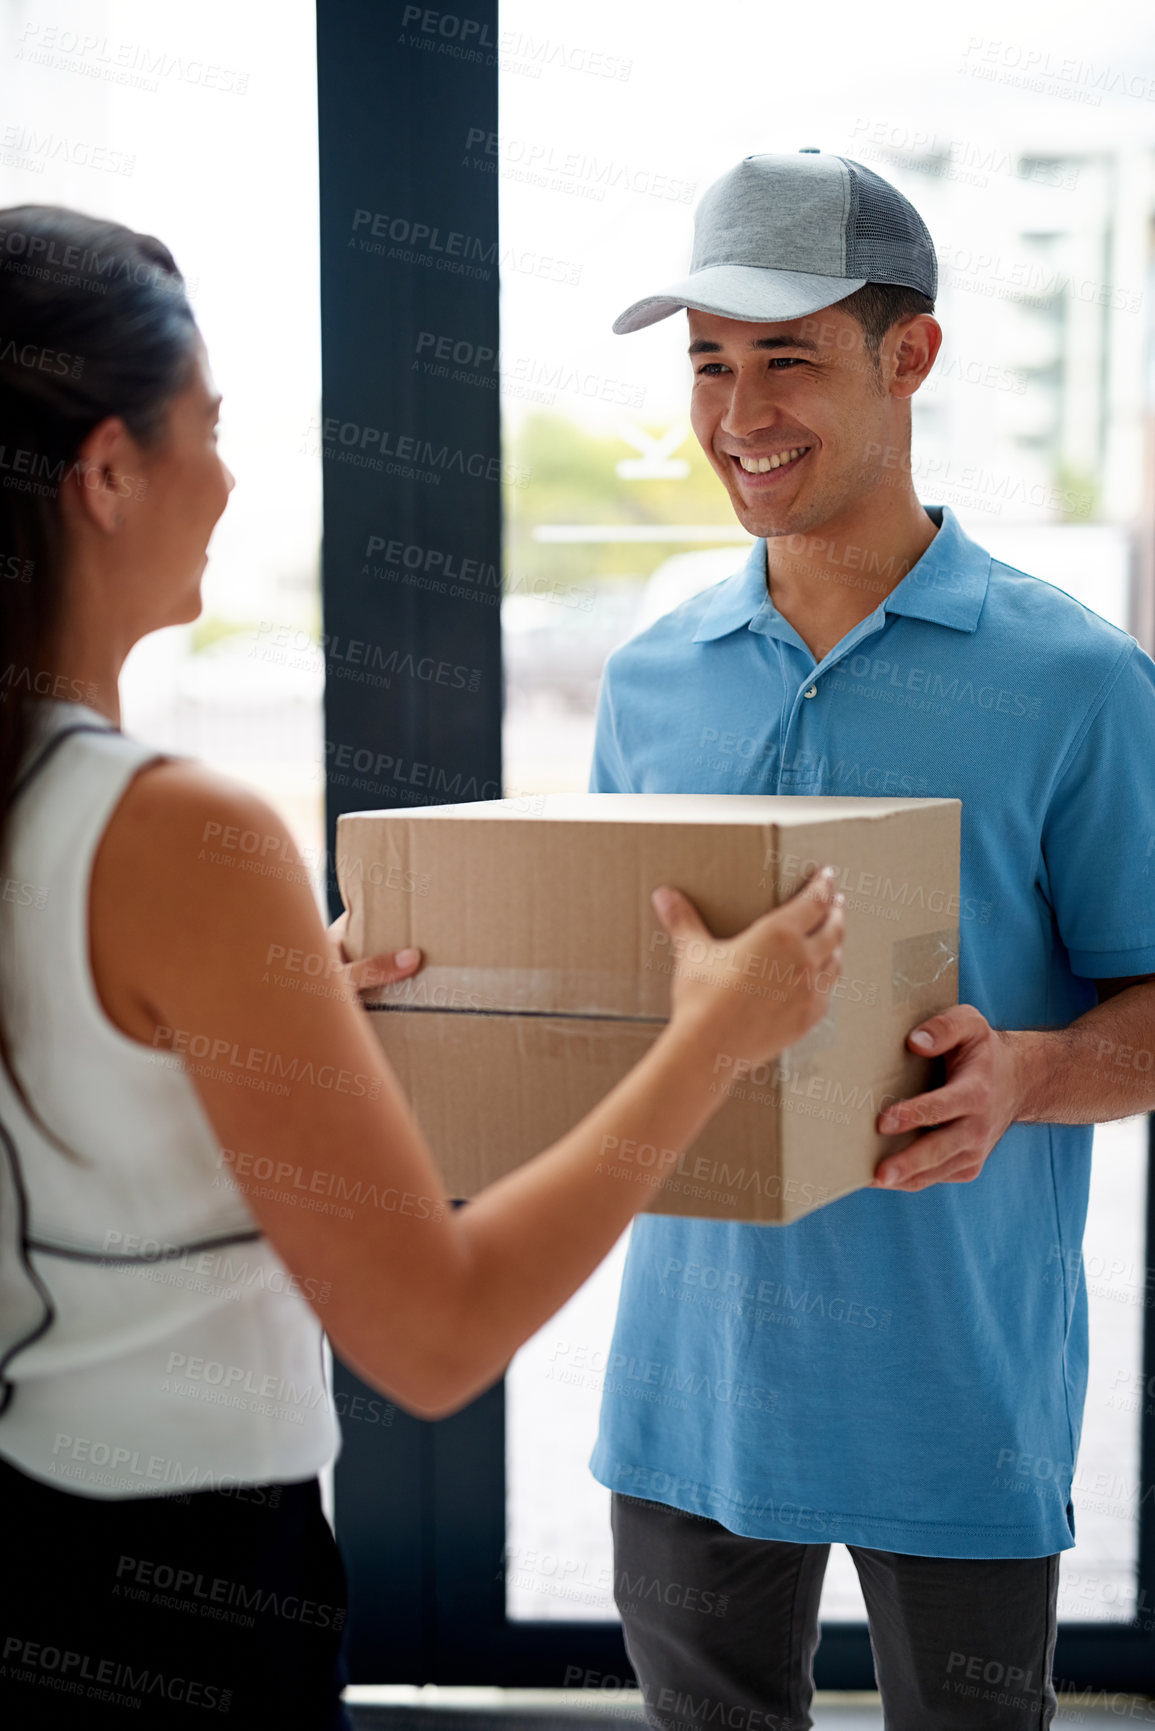 Buy stock photo Cropped shot of a courier making a delivery to a businesswoman at her office